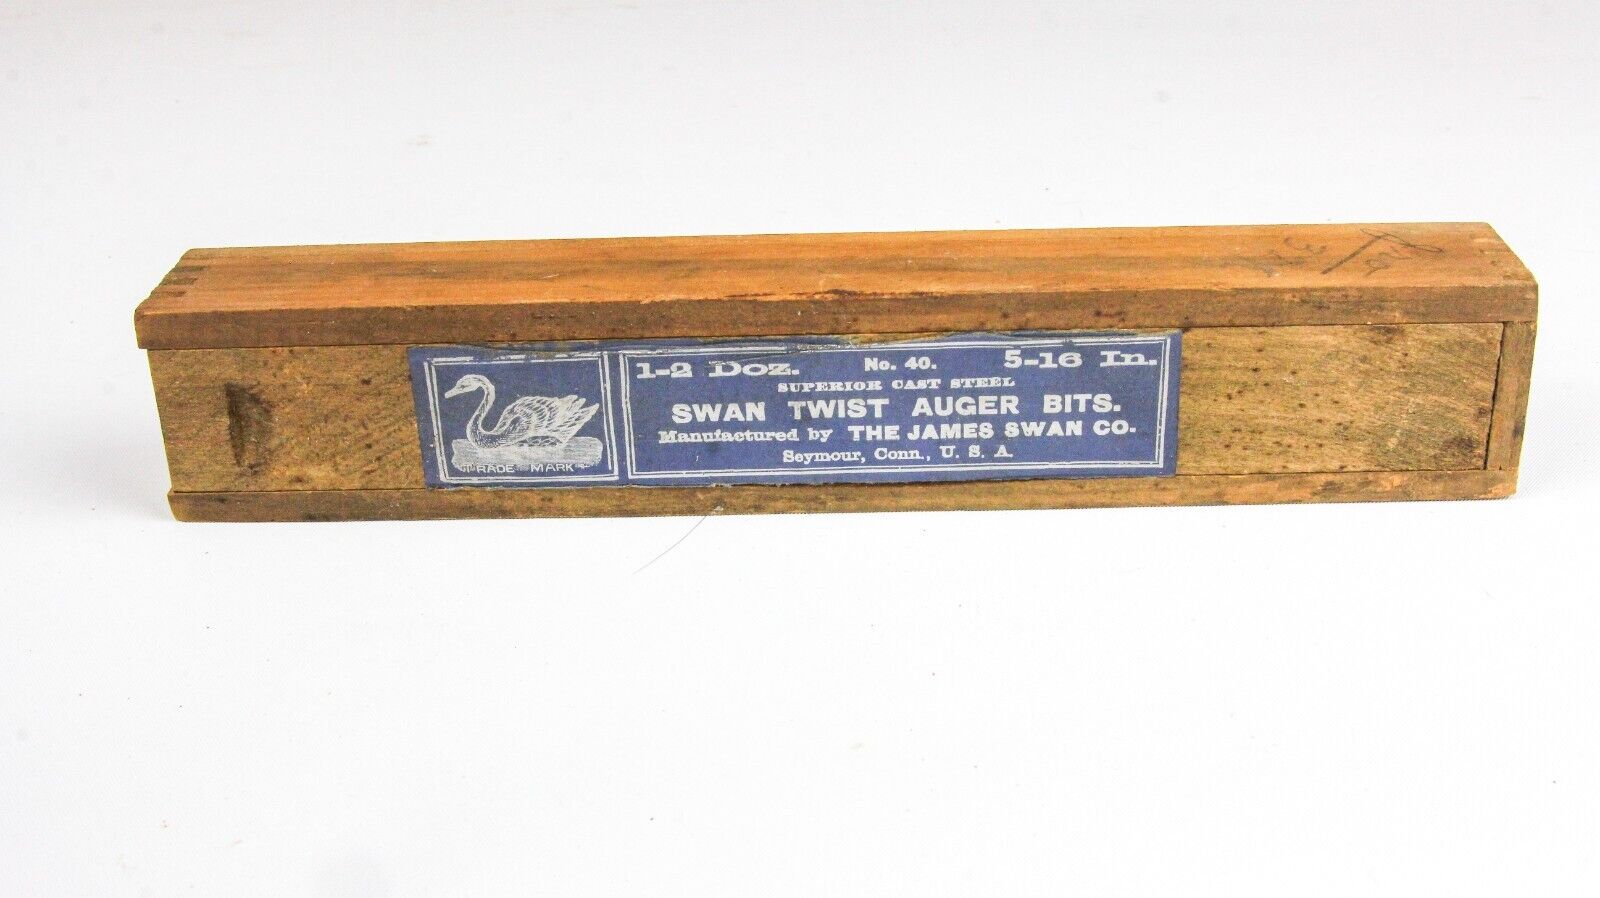 James Swan Auger Bits No. 40 5/16”- Empty vintage collectible box - hard to find